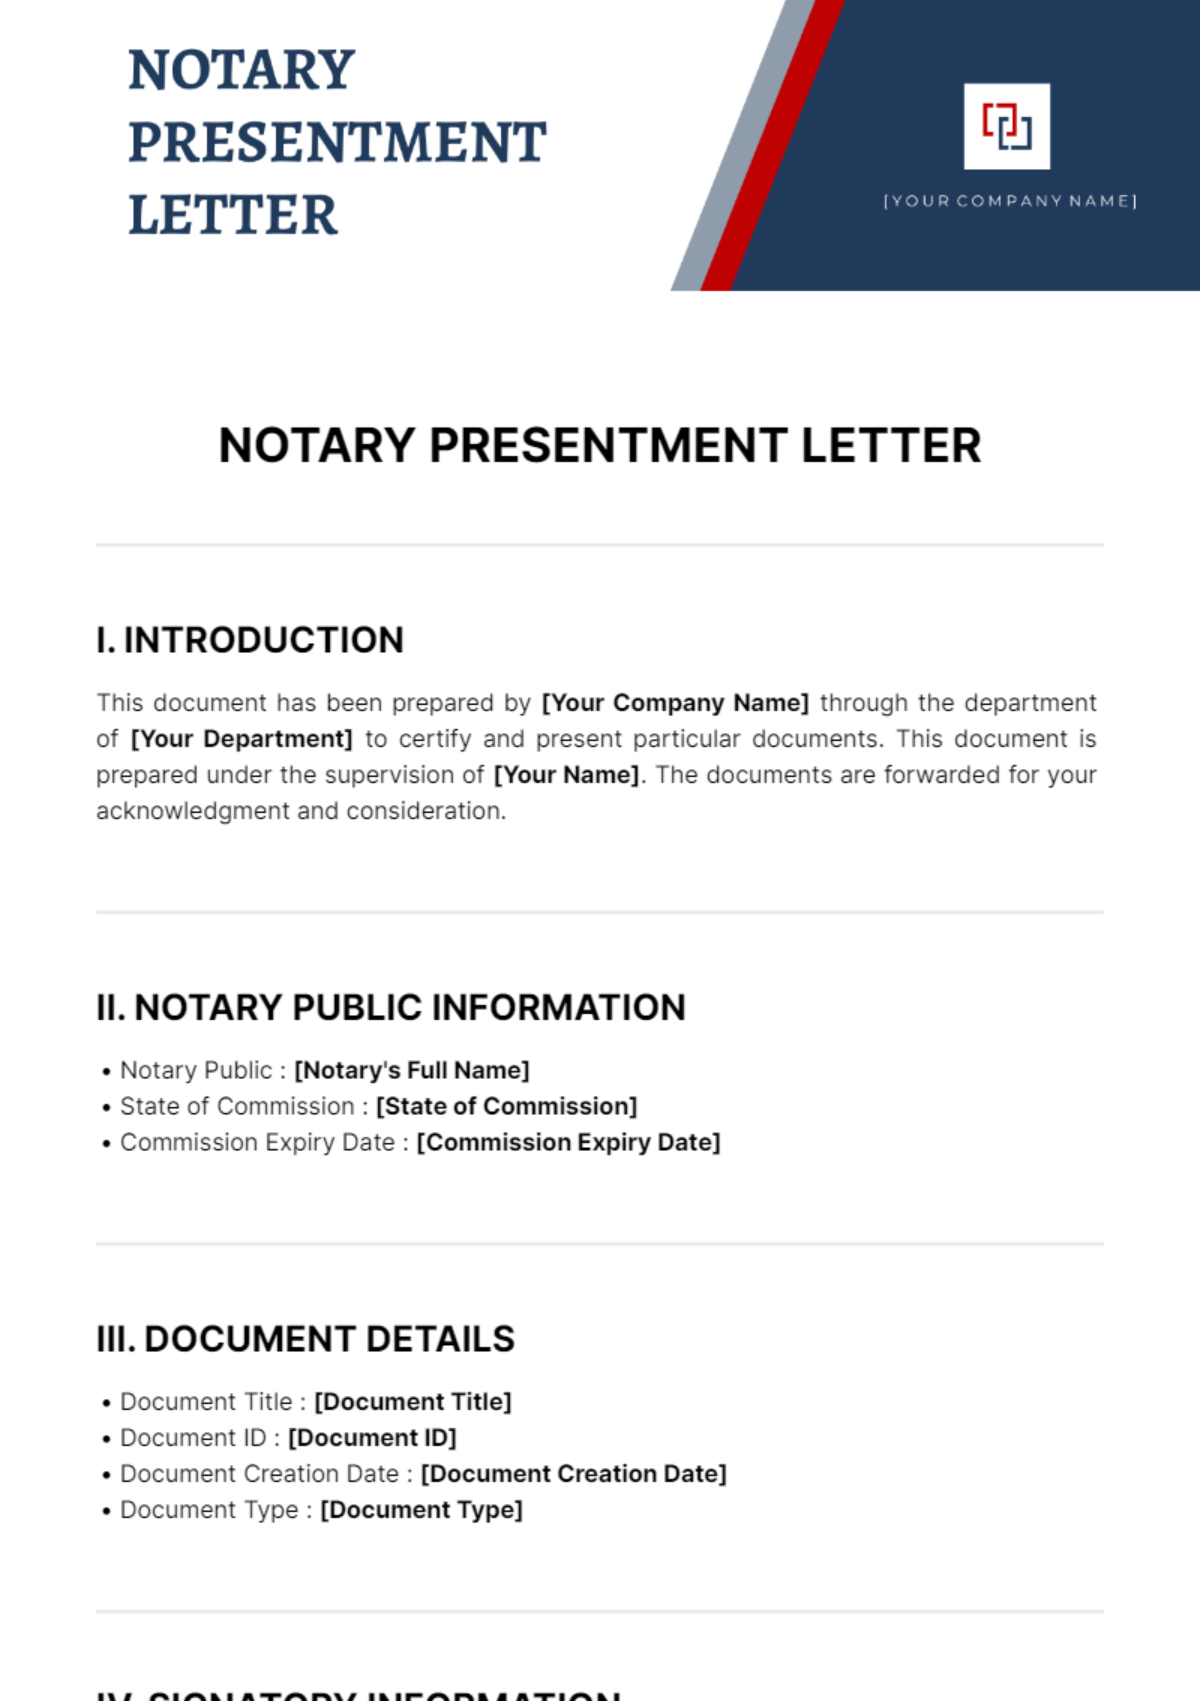 Notary Presentment Letter Template